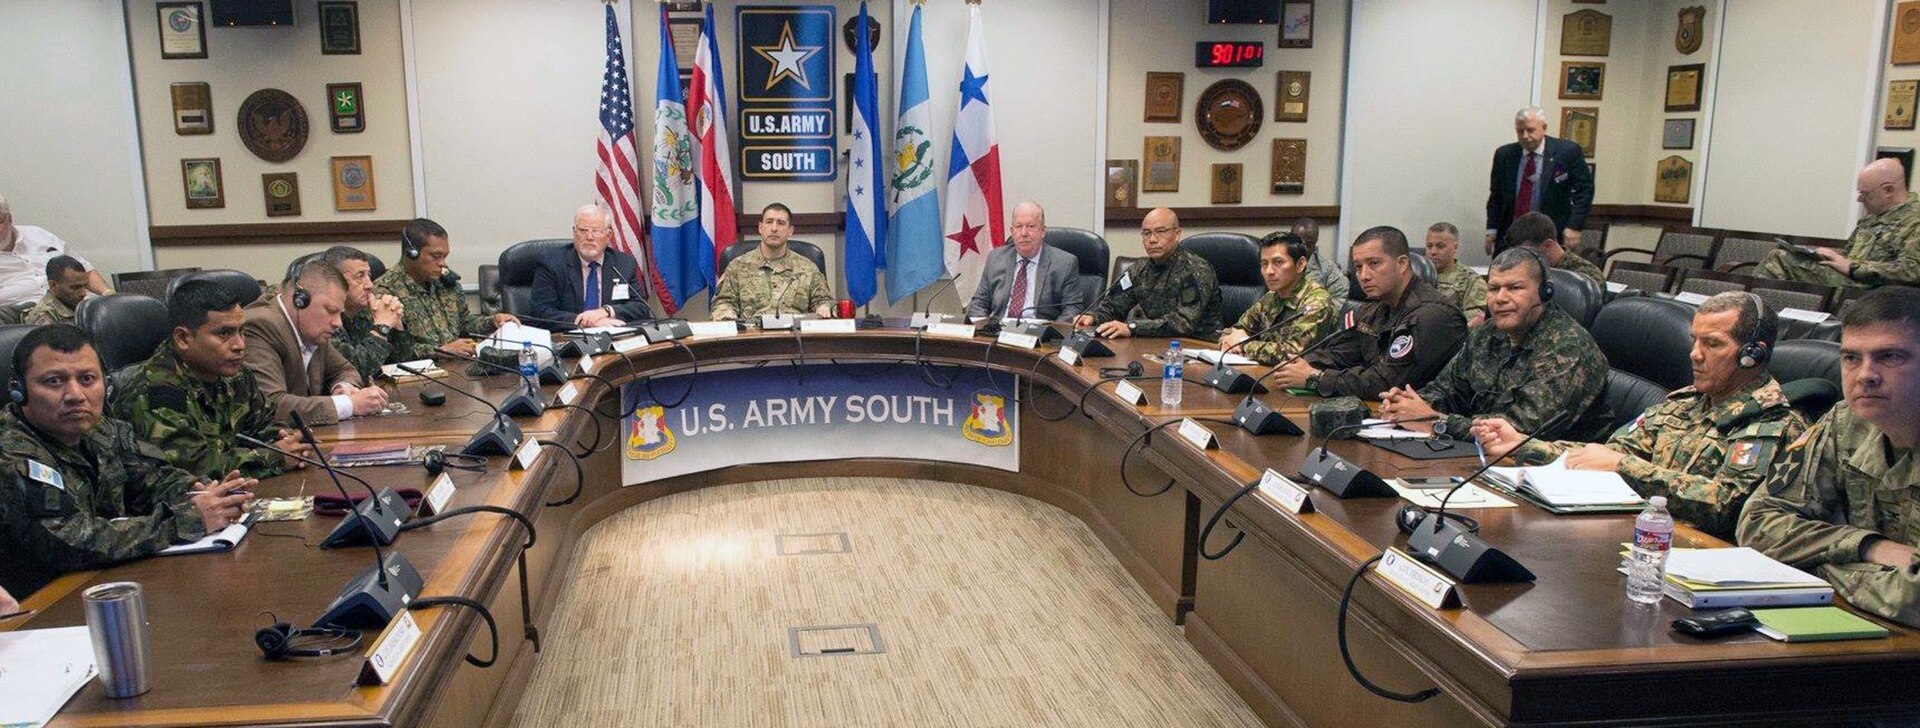 U.S. Army South hosted the Central America (CENTAM) Regional Working Group, at U.S. Army South headquarters at Joint Base San Antonio-Fort Sam Houston March 20-22. Senior leaders from partner nations in Central America, participated in the premier engagement between Army South staff and CENTAM senior intelligence and operations officers. Held annually, the meeting promotes mutual security interests and interoperability.